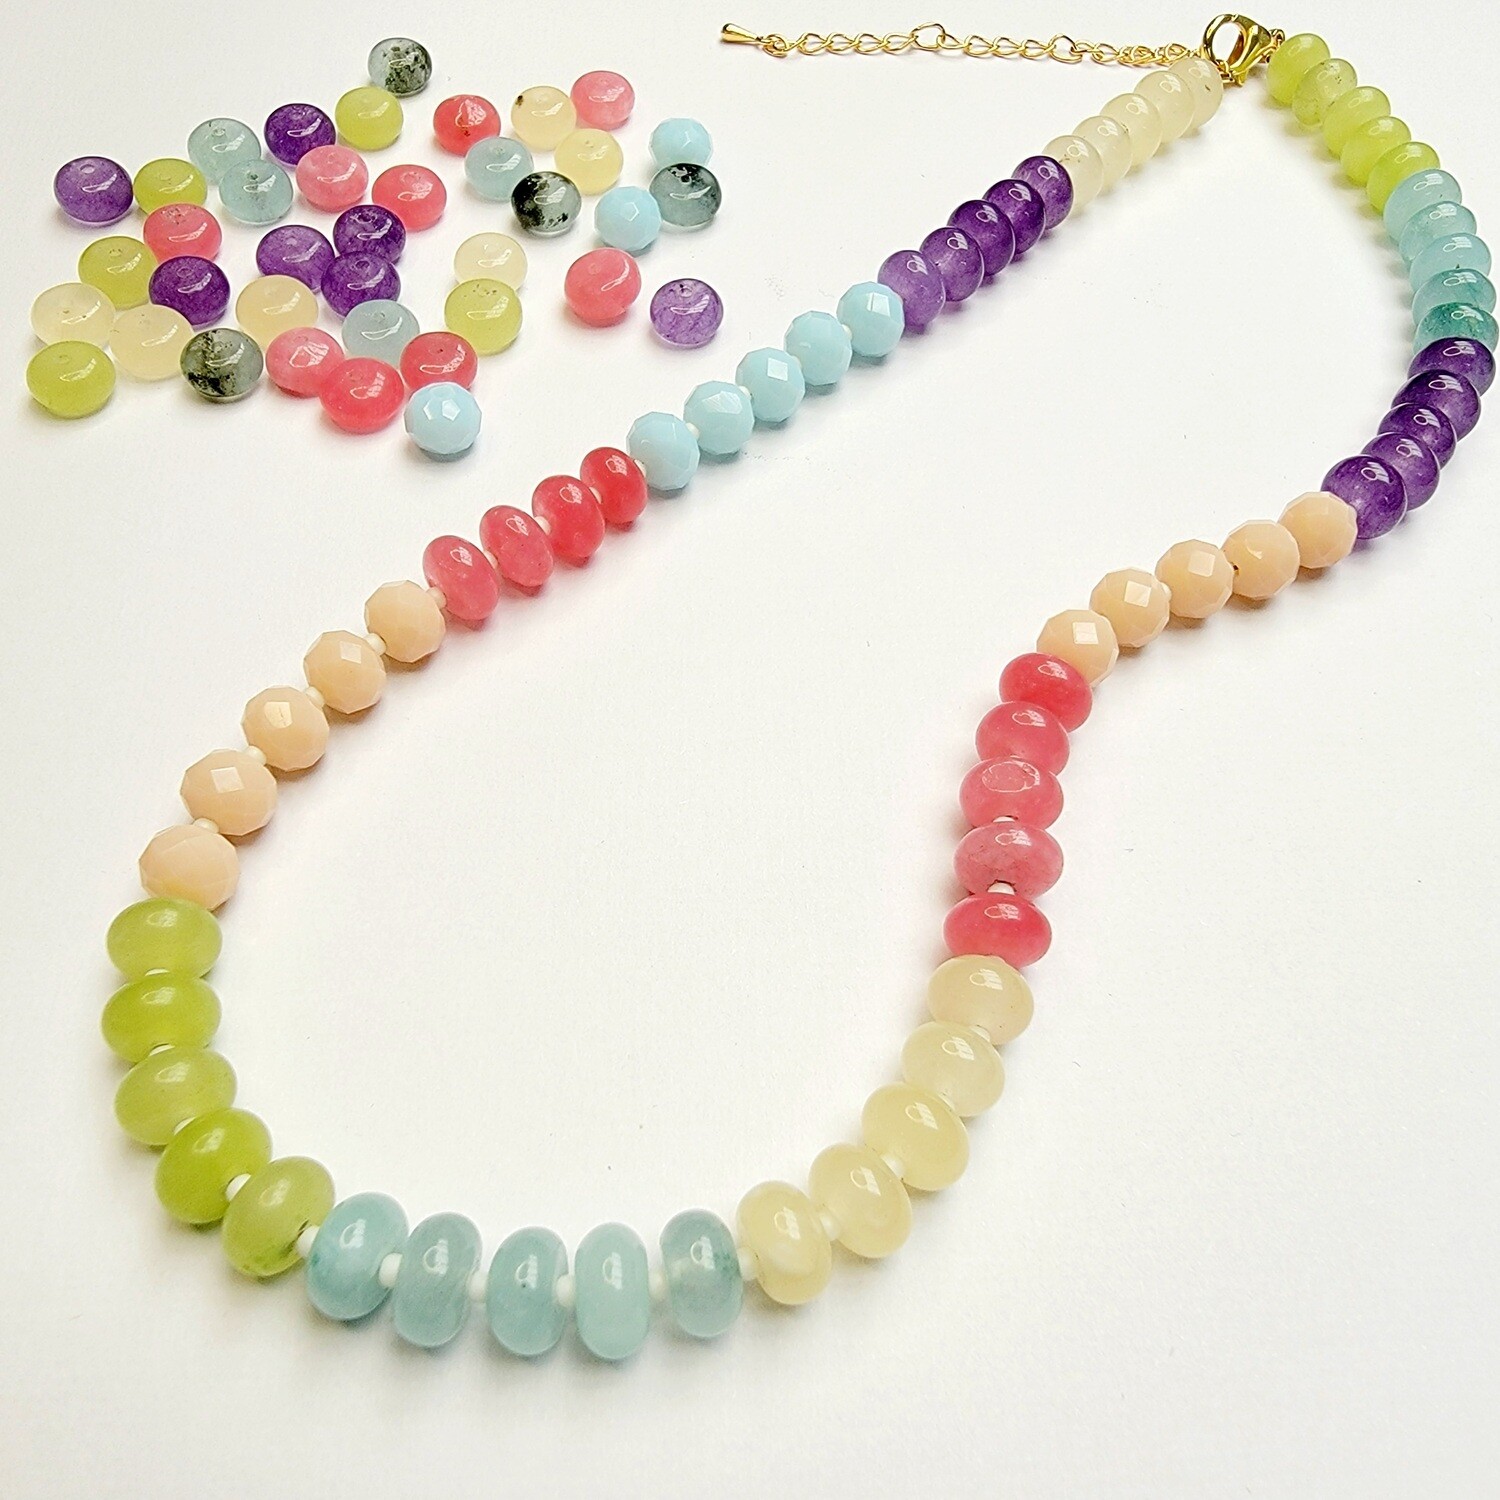 Rainbow Jade Necklace - Silver Plated Finishes *CLOSEOUT*